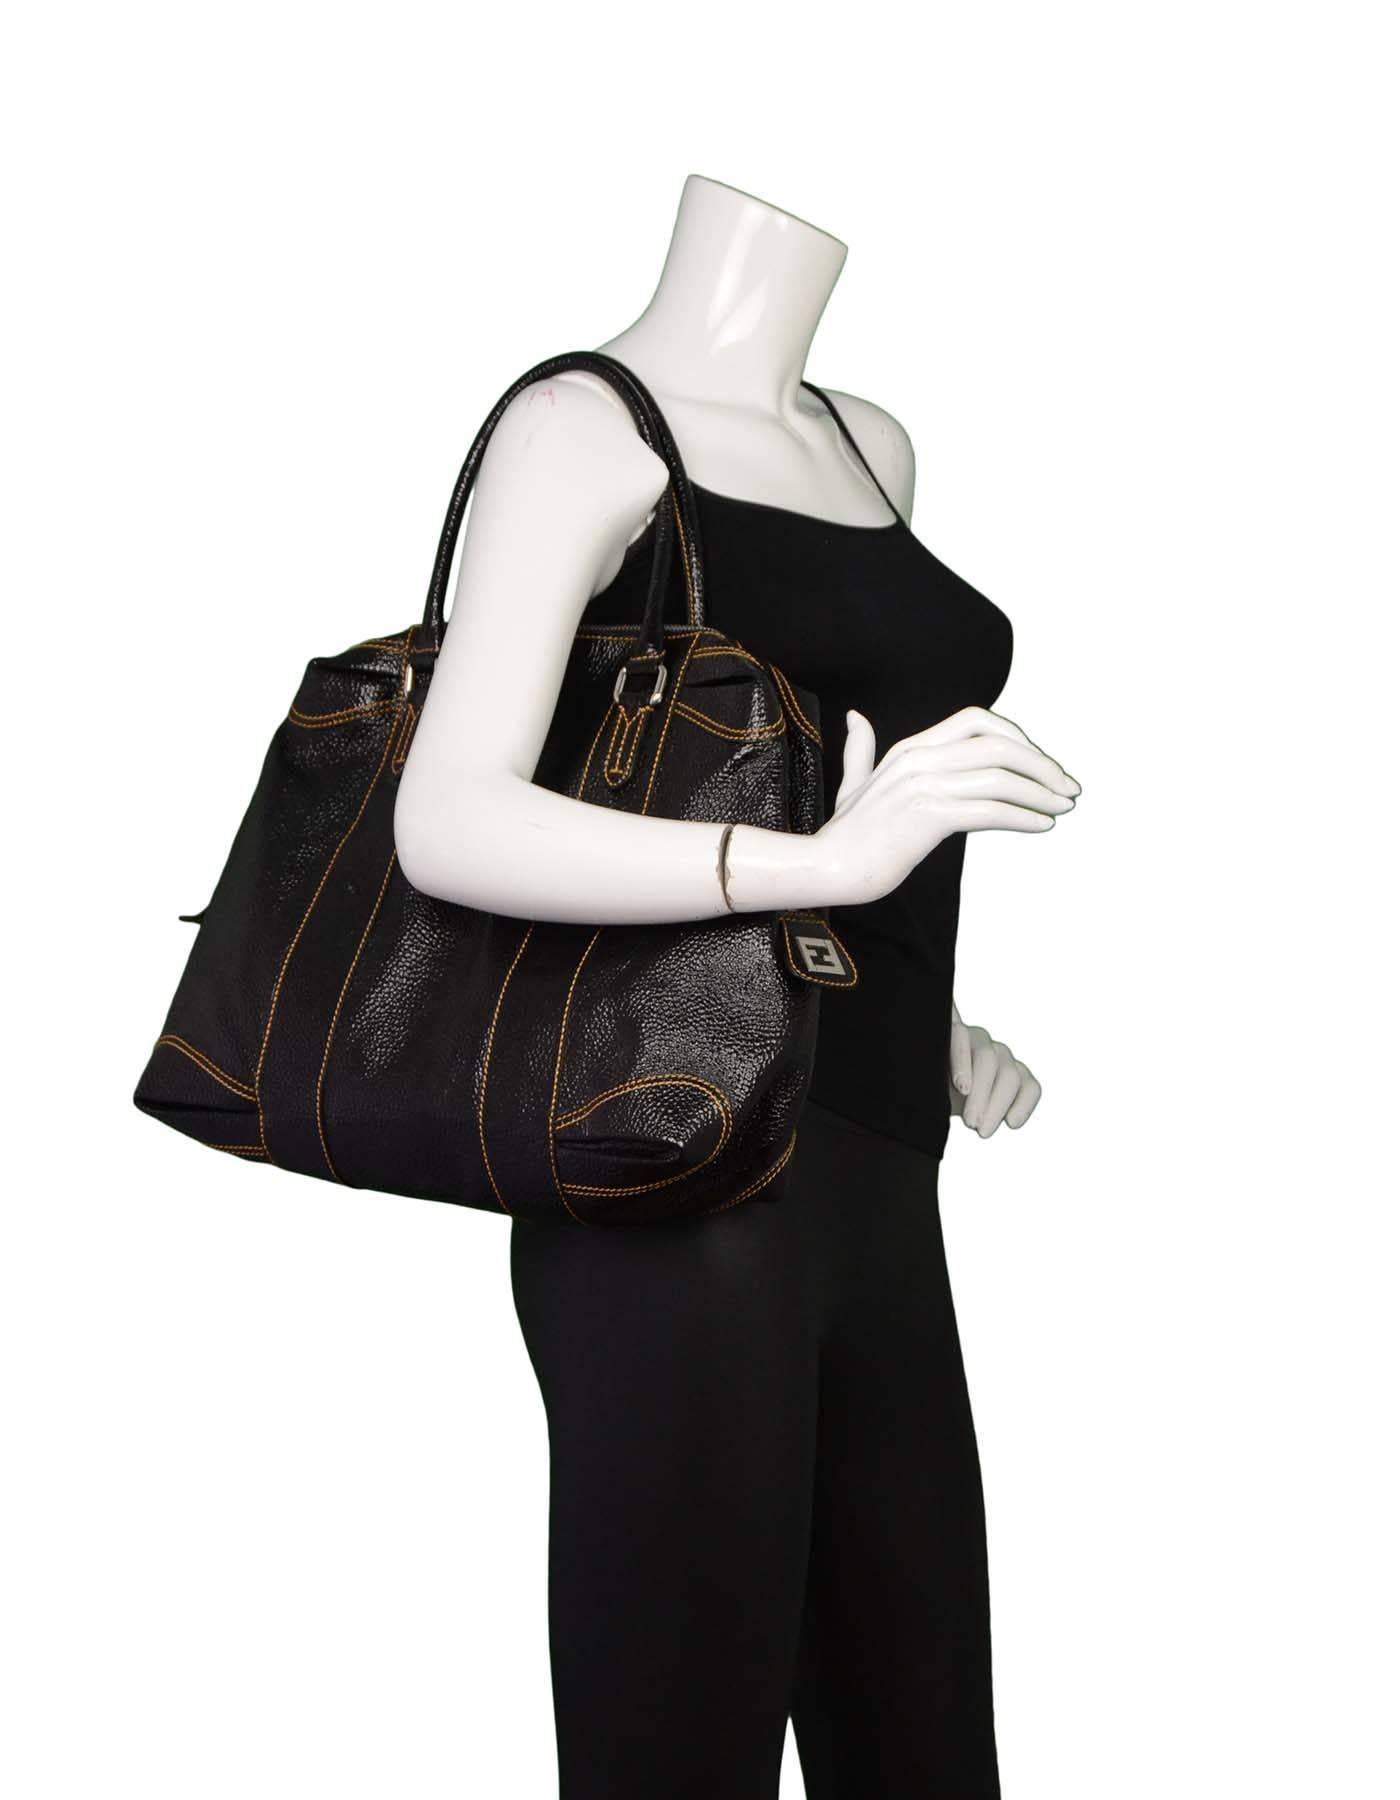 Fendi Black Grained Patent Leather Tote

Made in: Italy
Color: Black
Hardware: Silvertone
Materials: Patent leather
Lining: Black textile
Closure/opening: Zip top closure
Exterior Pockets: None
Interior Pockets: Two wall pockets
Overall